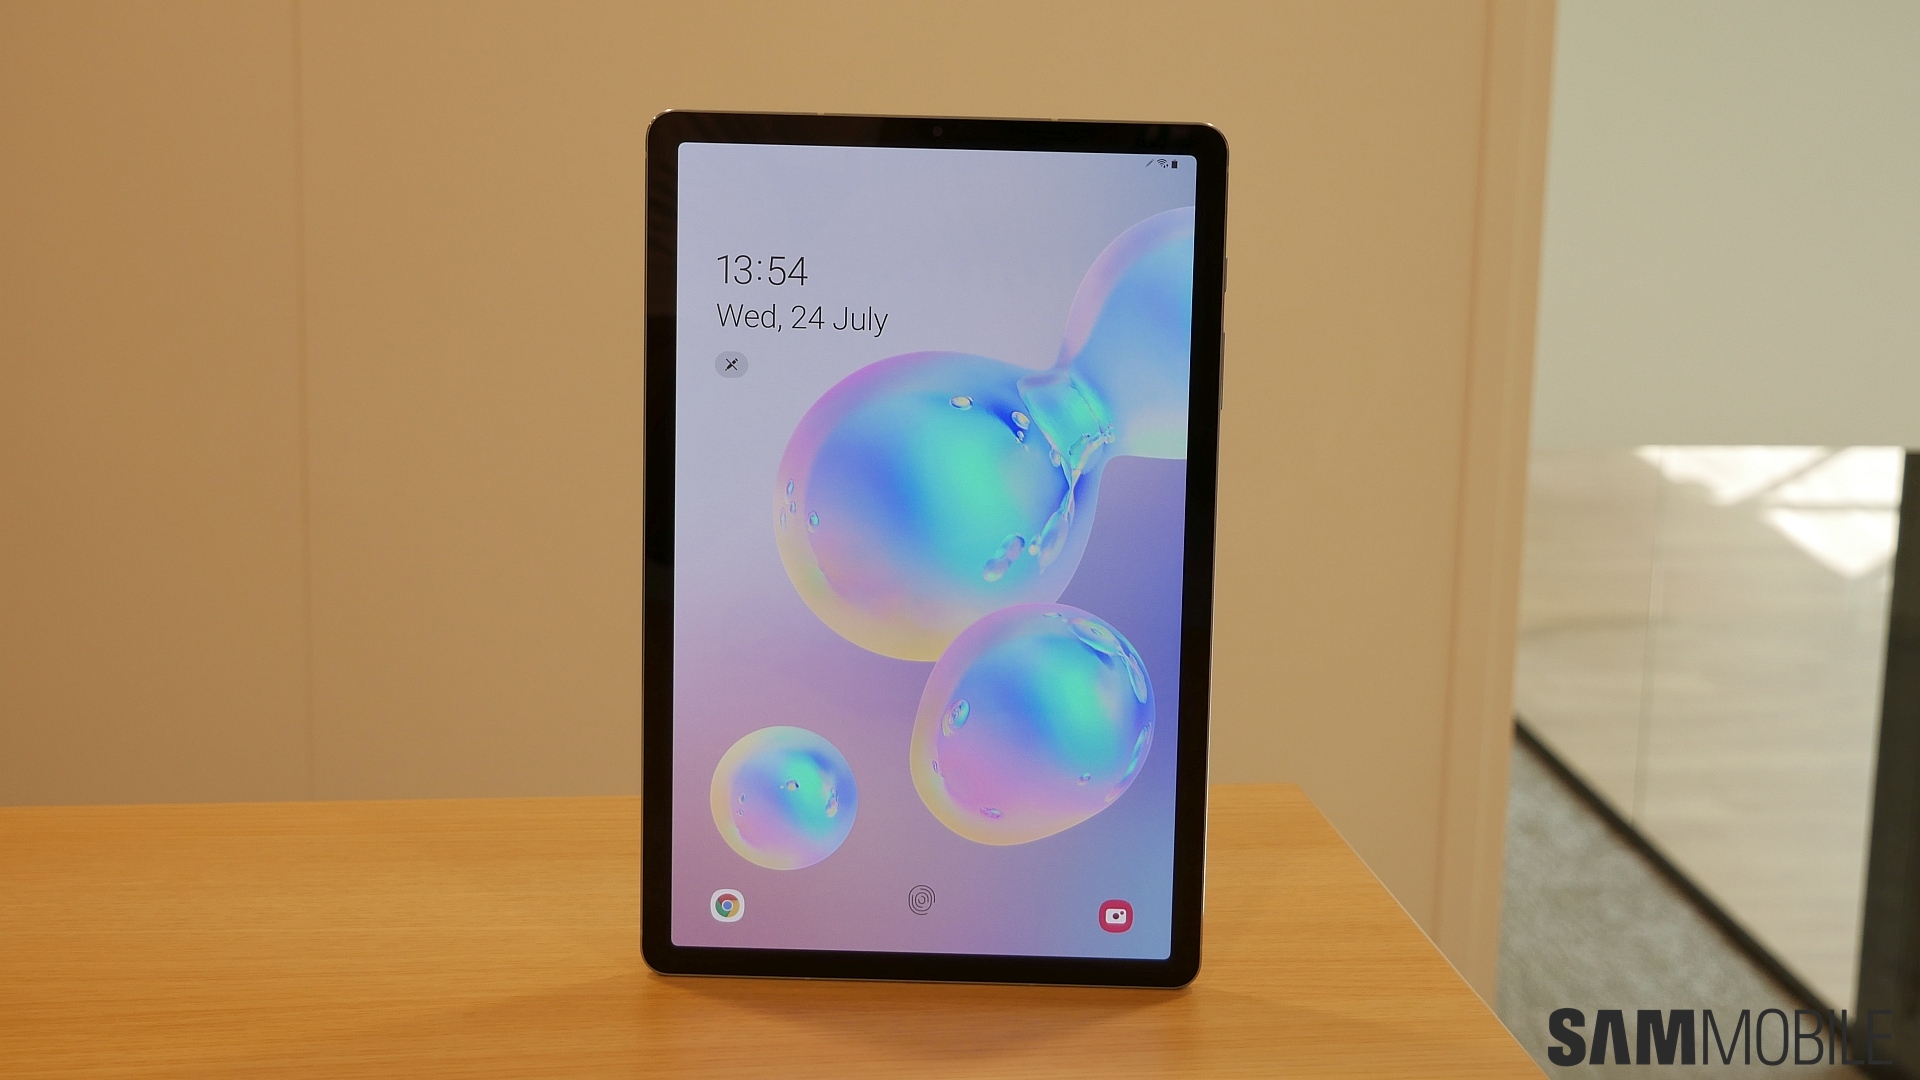 Download Samsung Galaxy Tab S6 wallpapers here! - SamMobile